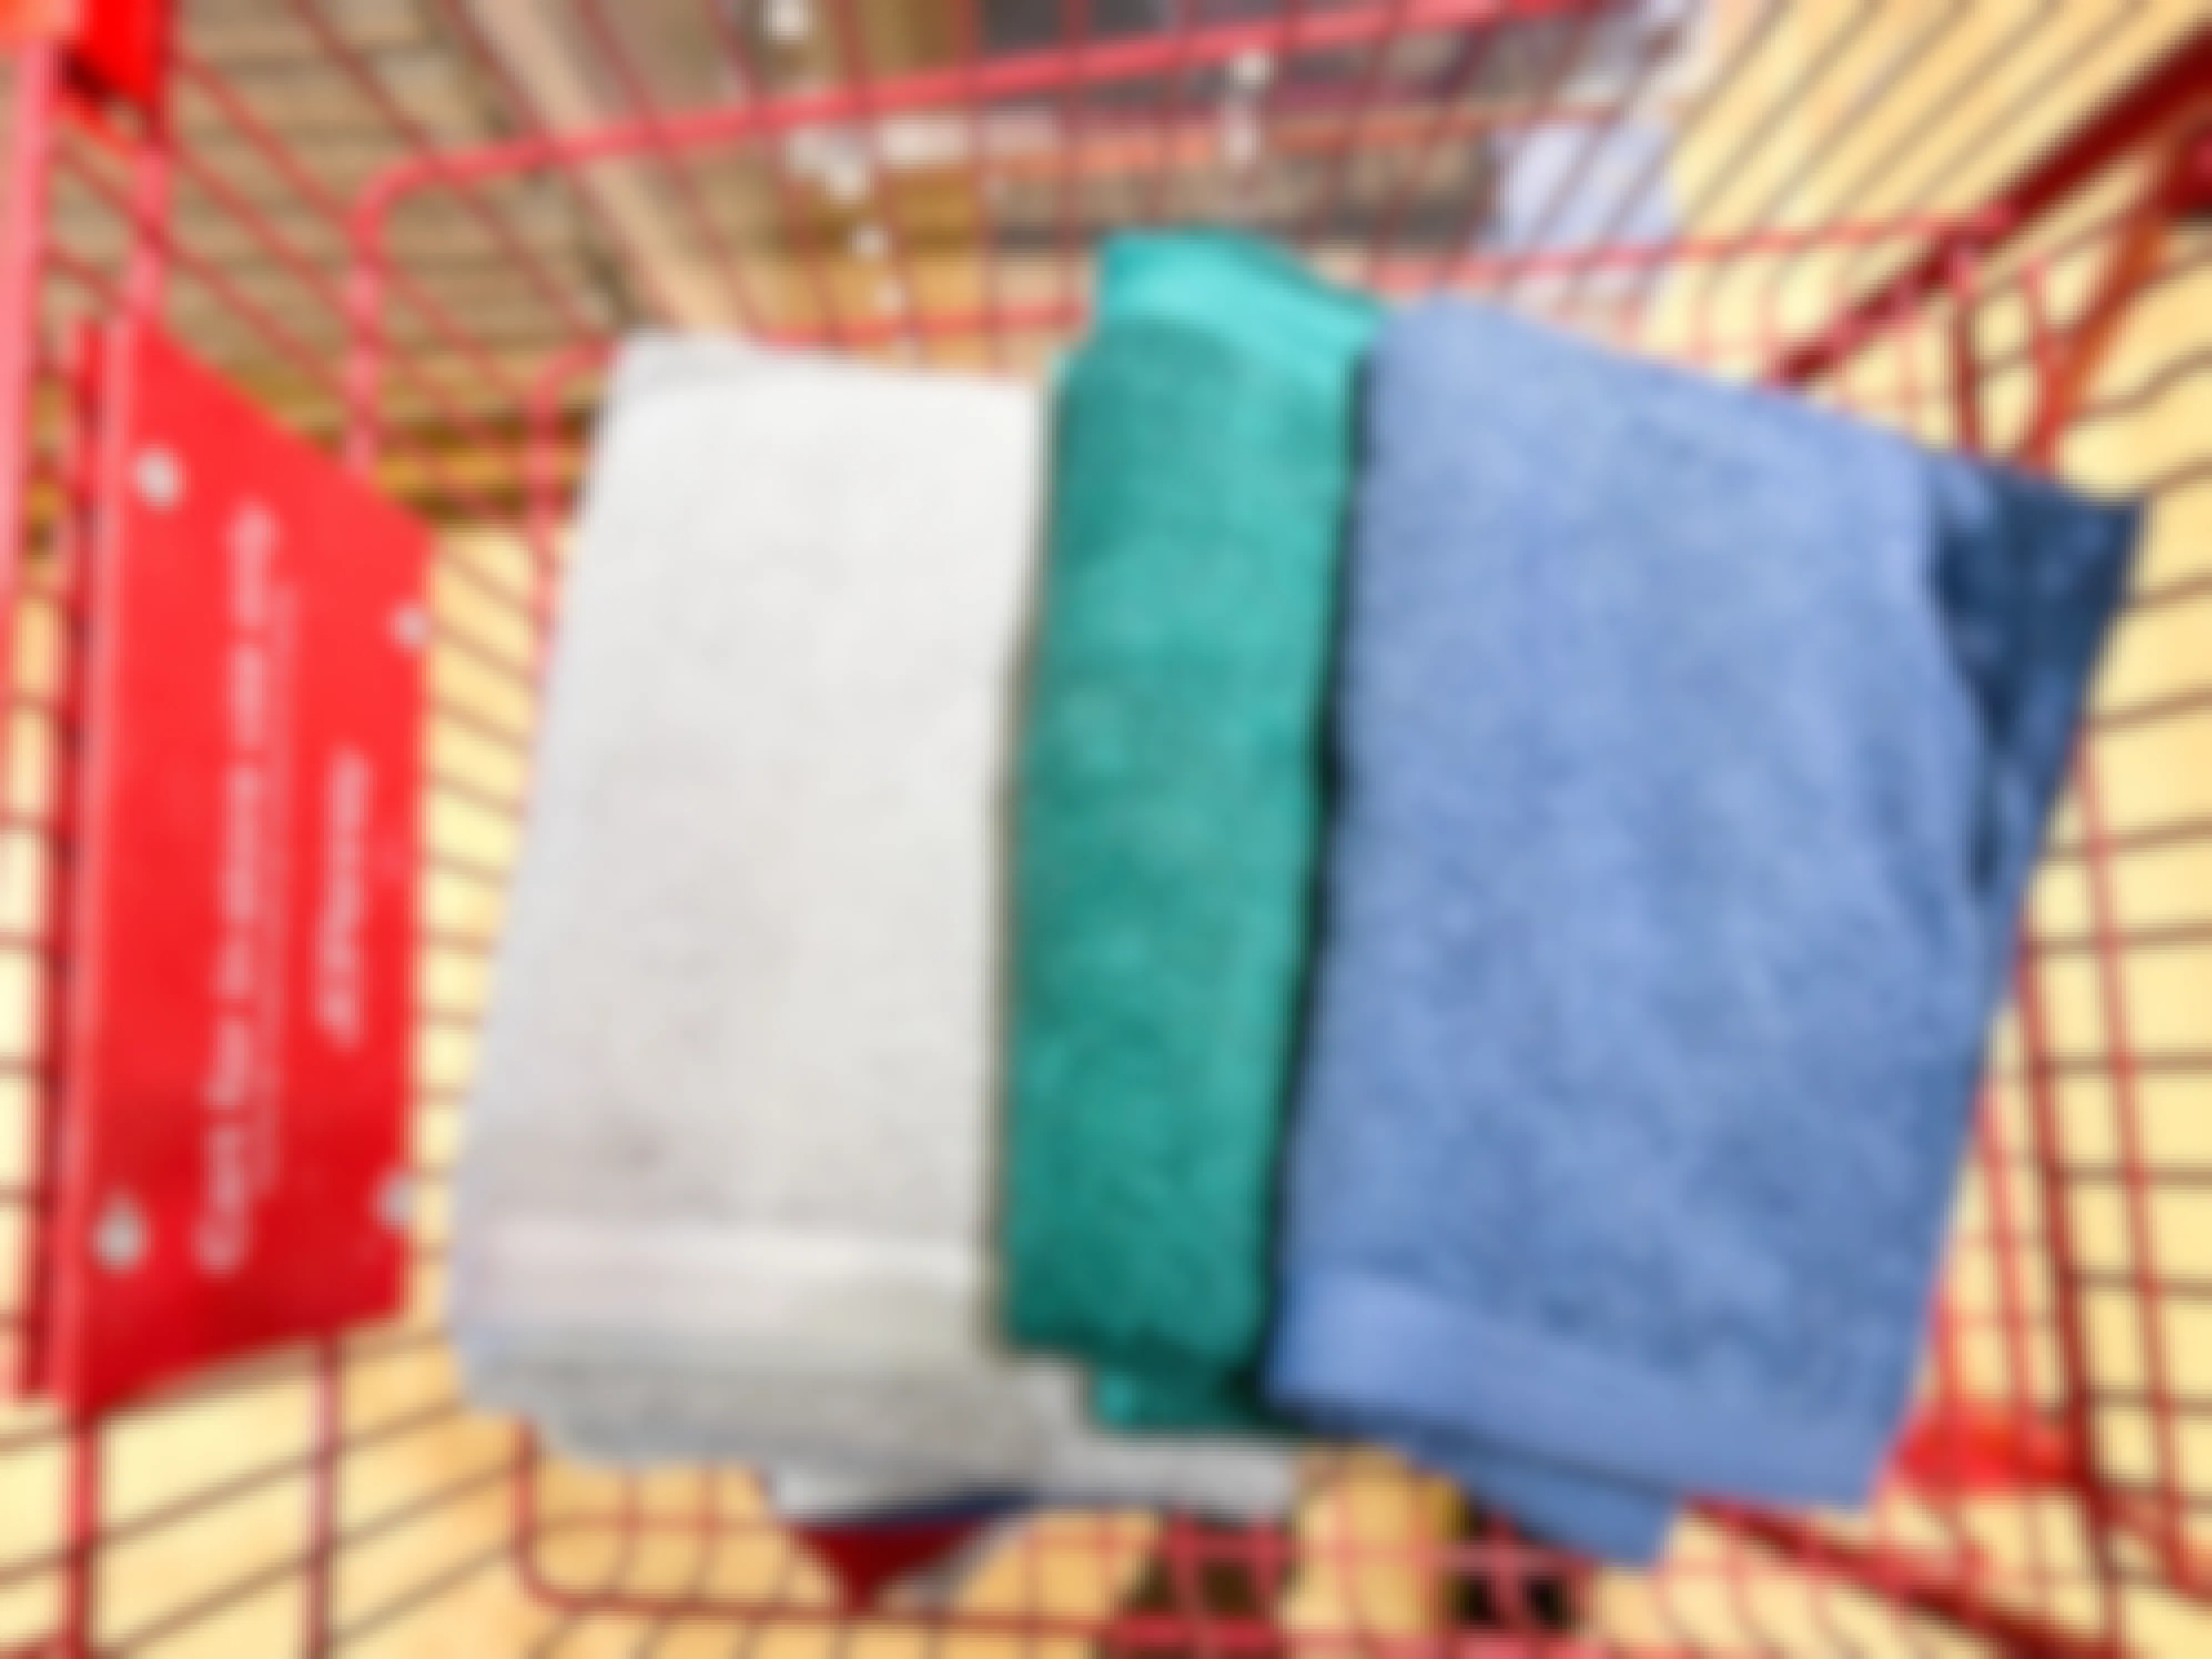 solid colors towels in a shopping cart